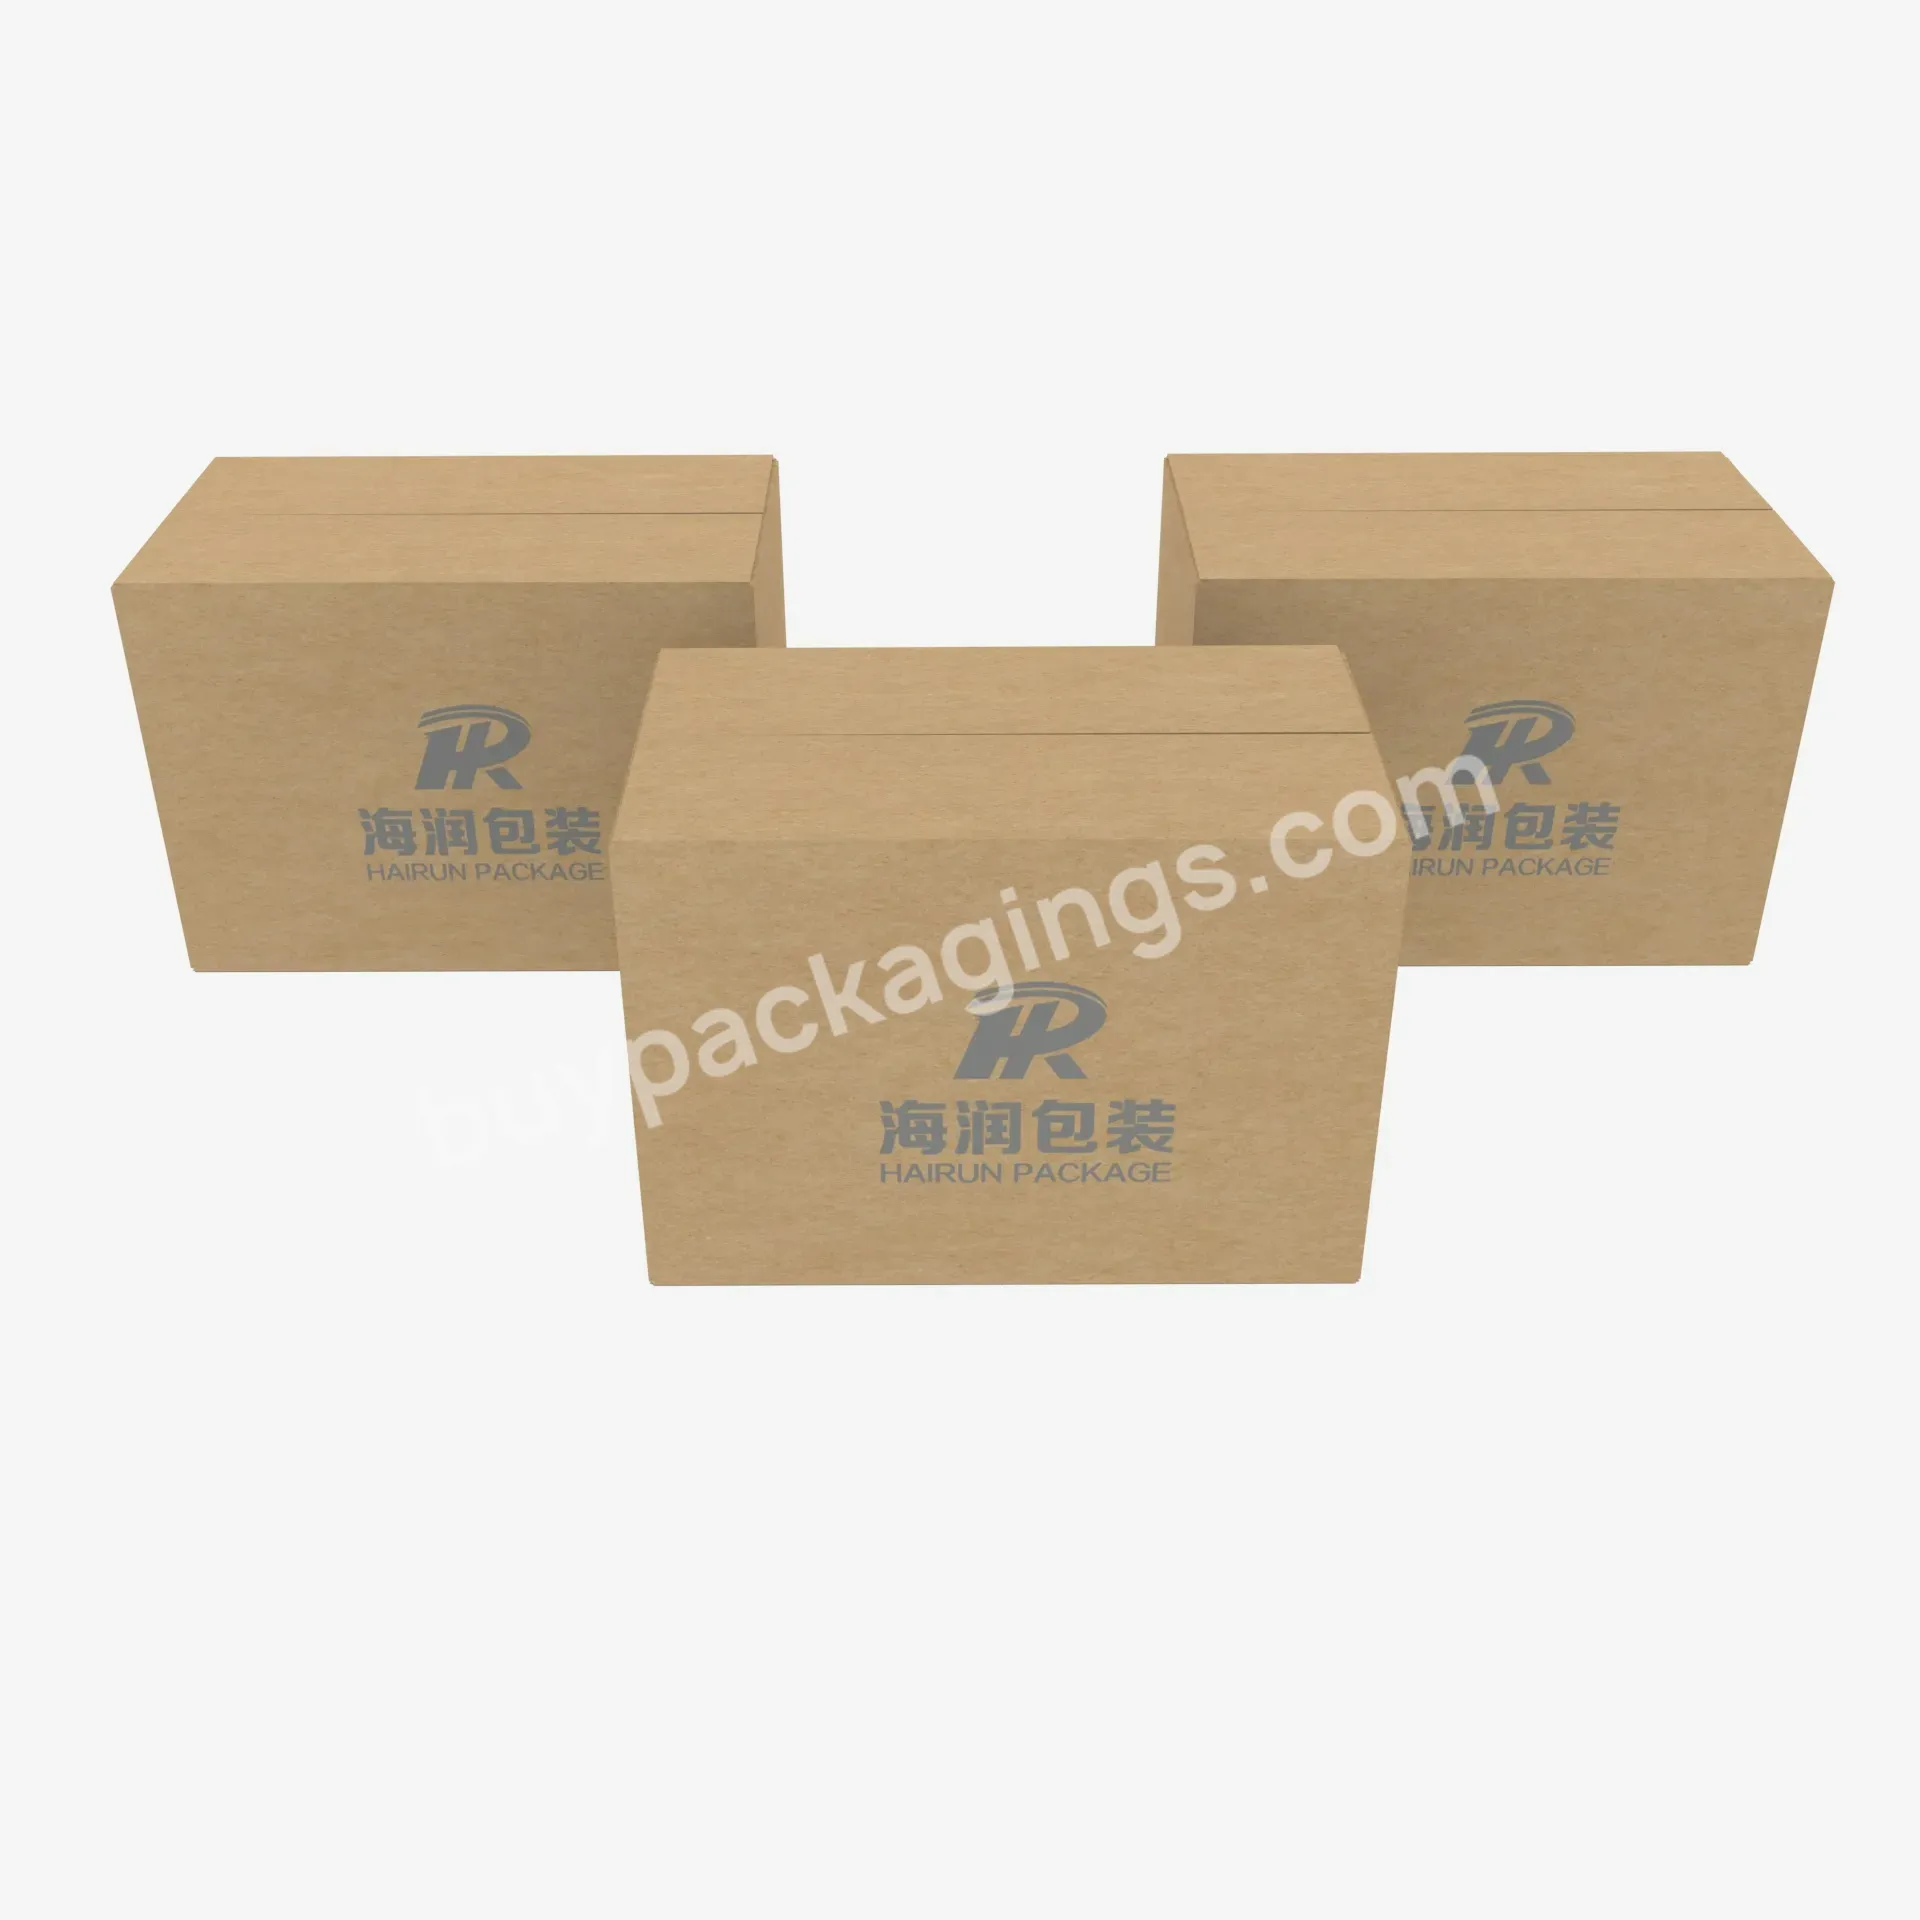 Corrugated Cartons Are Commonly Used In E-commerce. They Are Solid Fruit And Vegetable Boxes